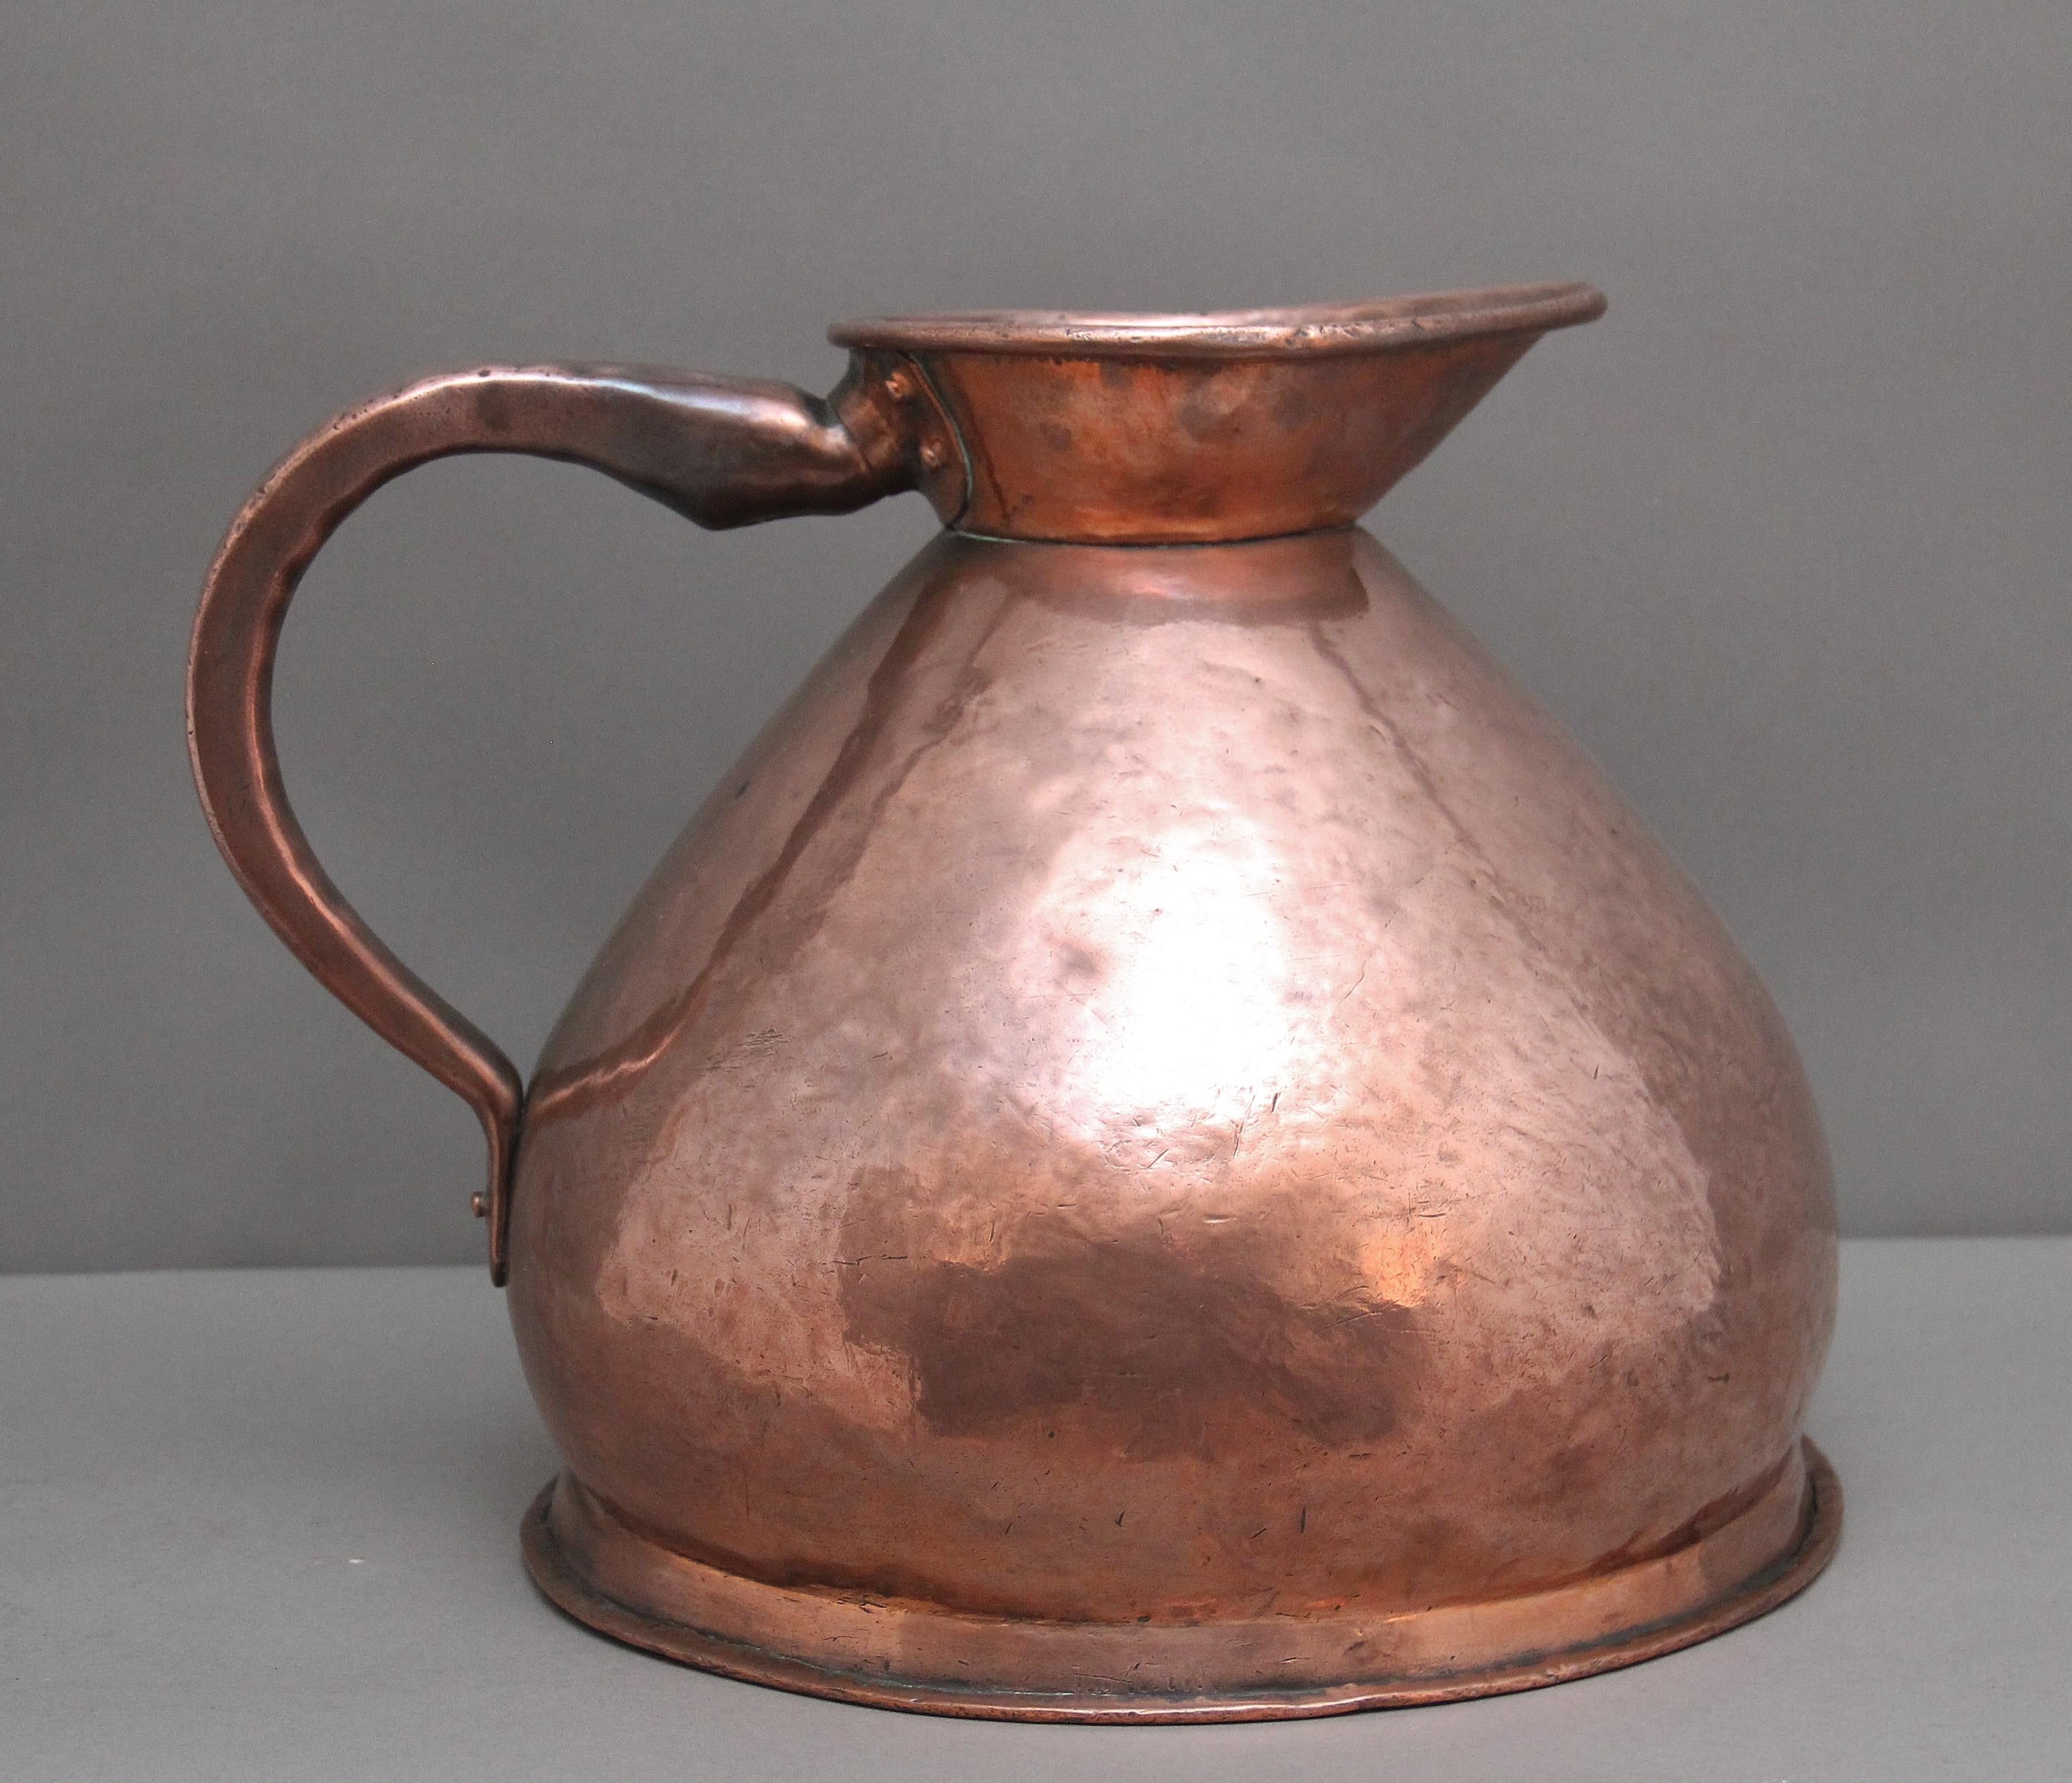 19th Century four gallon copper haystack measuring jug in very good condition and marked at the front with four gallon, having a large shaped handle to one side, the haystack jug named for it's wide based form and having a large spout.  Circa 1870.
